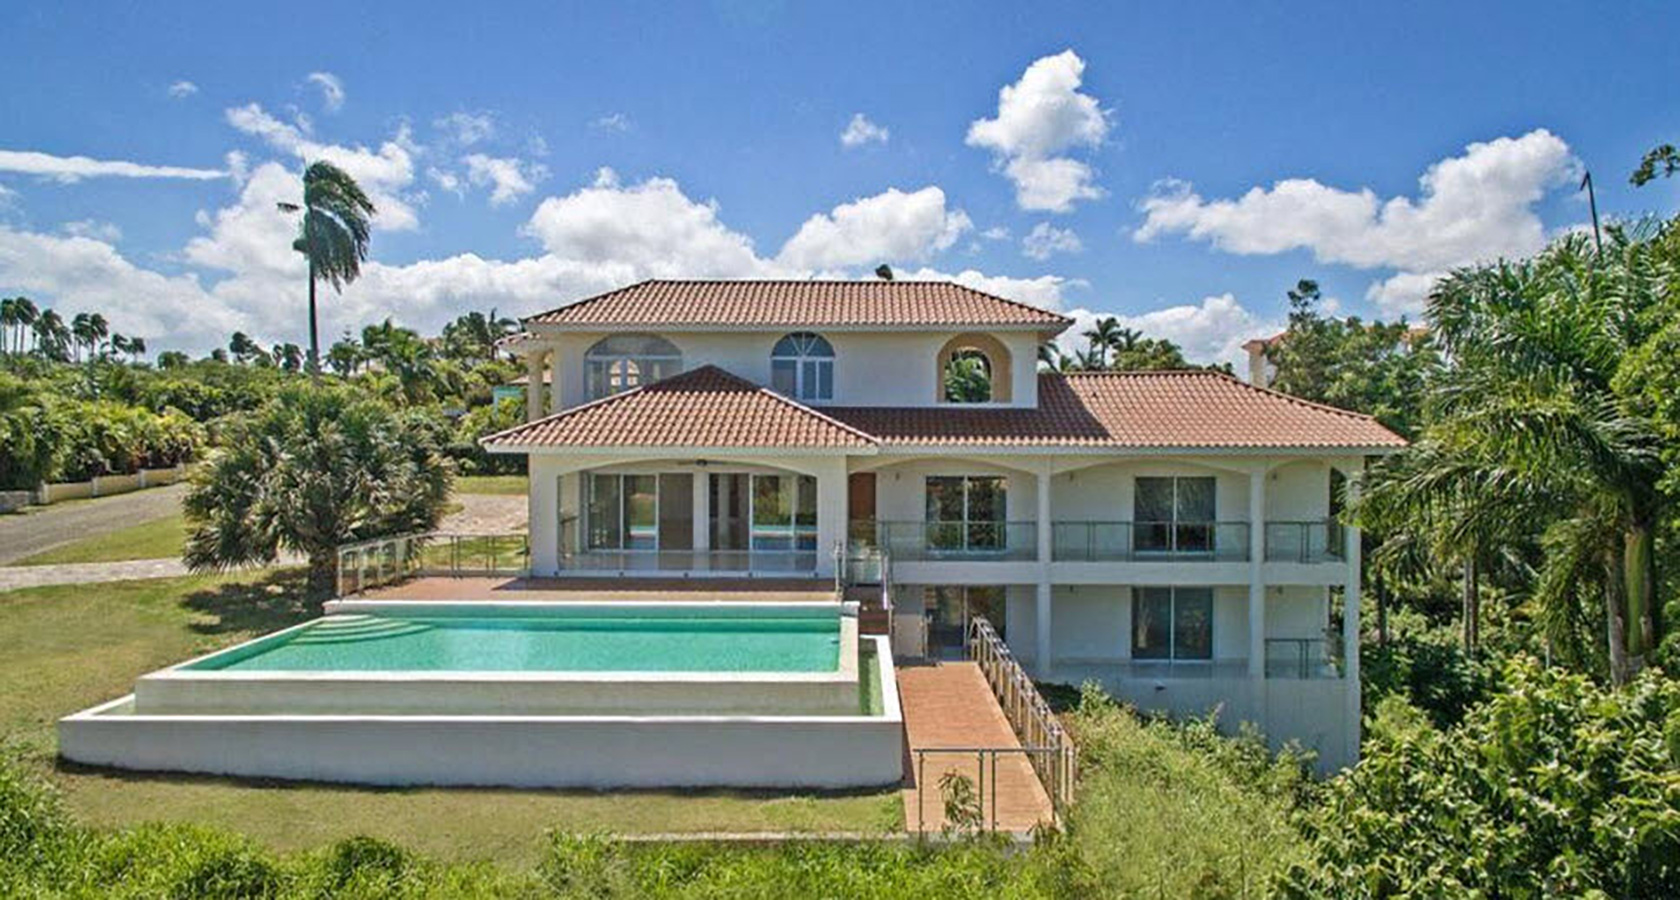 Side view of the Villa and Pool